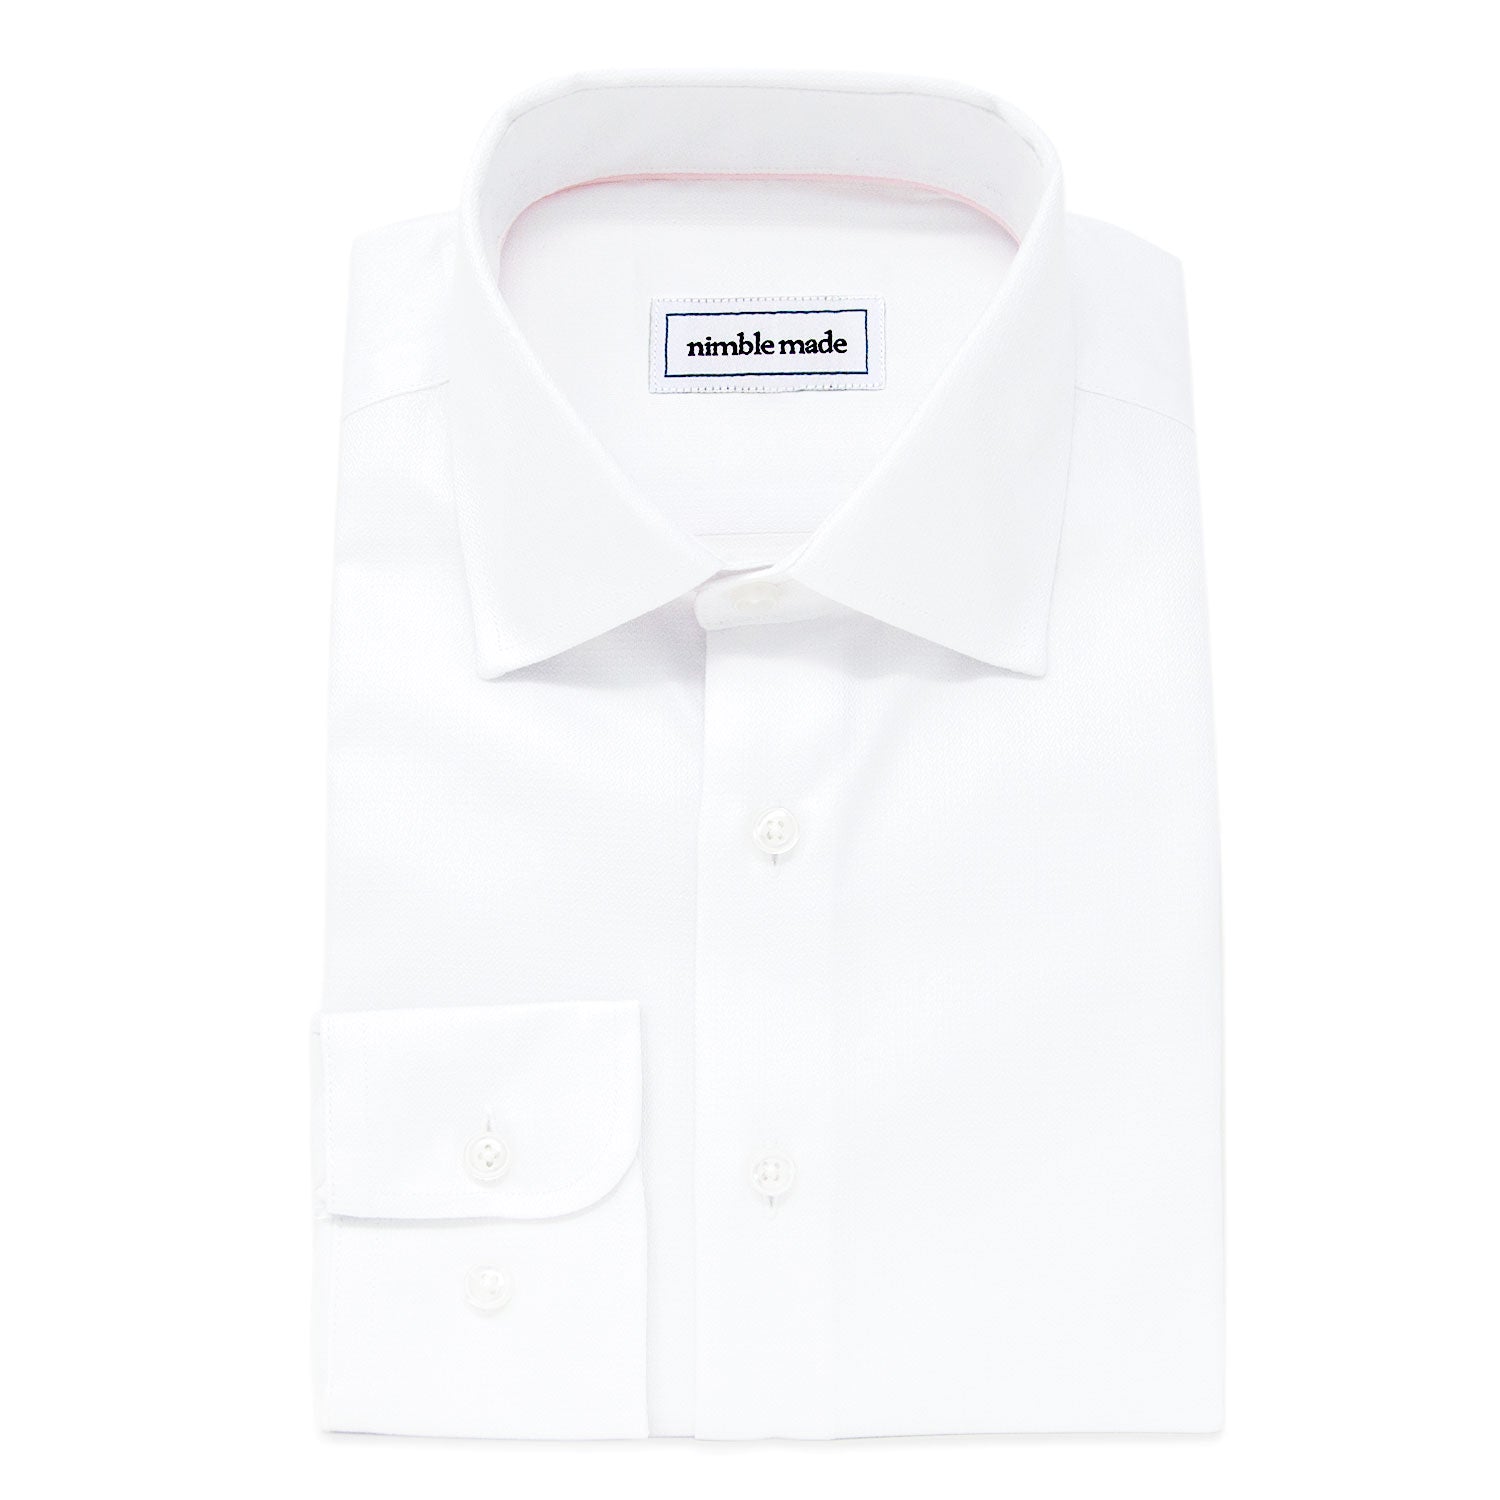 men's white button up shirt in solid white fabric